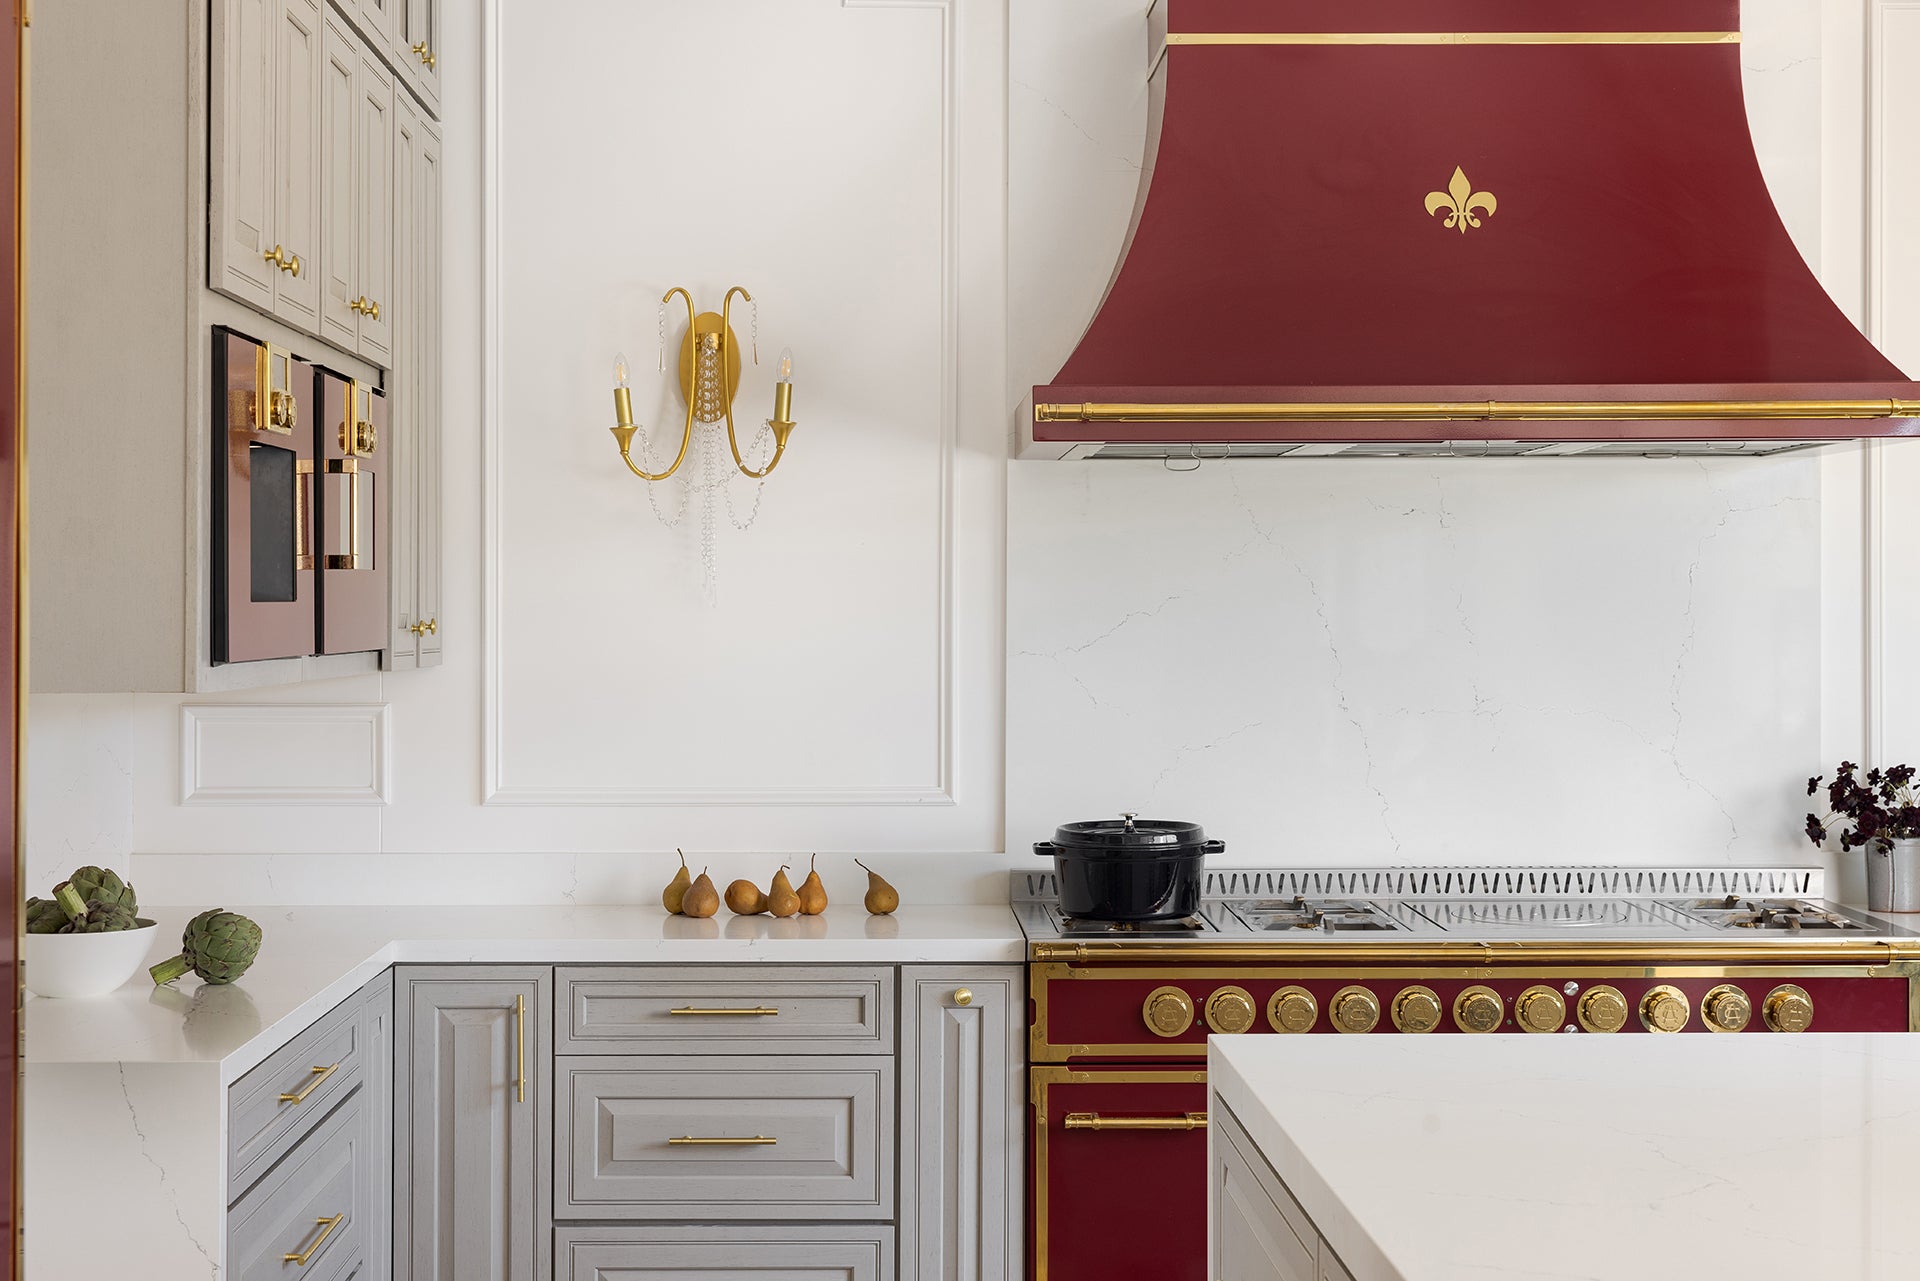 Kitchen remodeling with French Kitchen Ranges and golden french burner and red custom kitchen hood